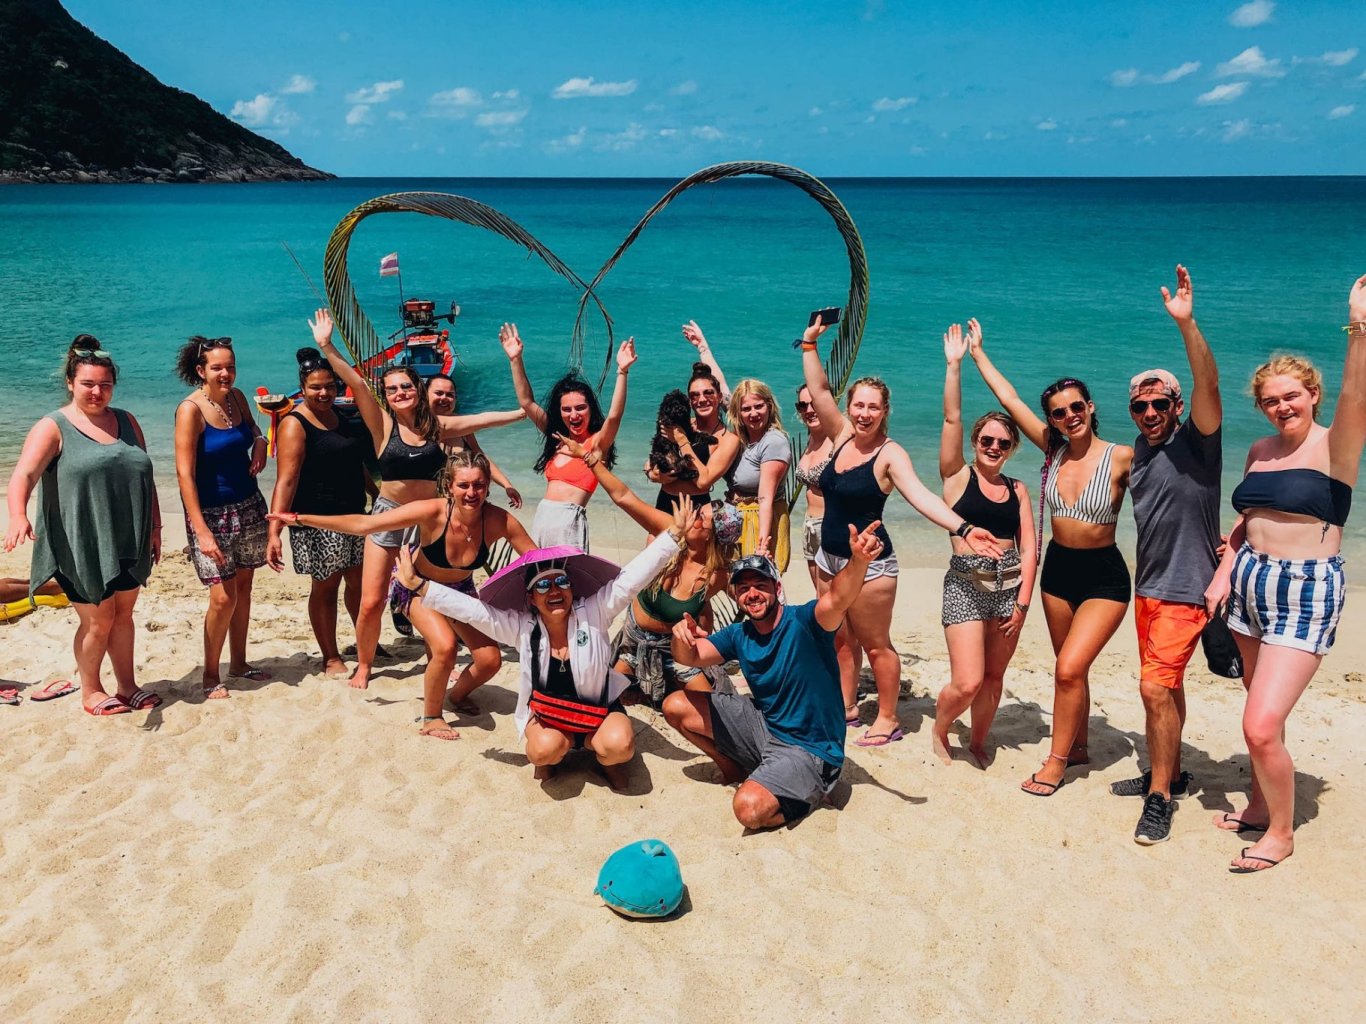 A group photo in front of the blue ocean at bottle beach in Koh Phangan Thailand